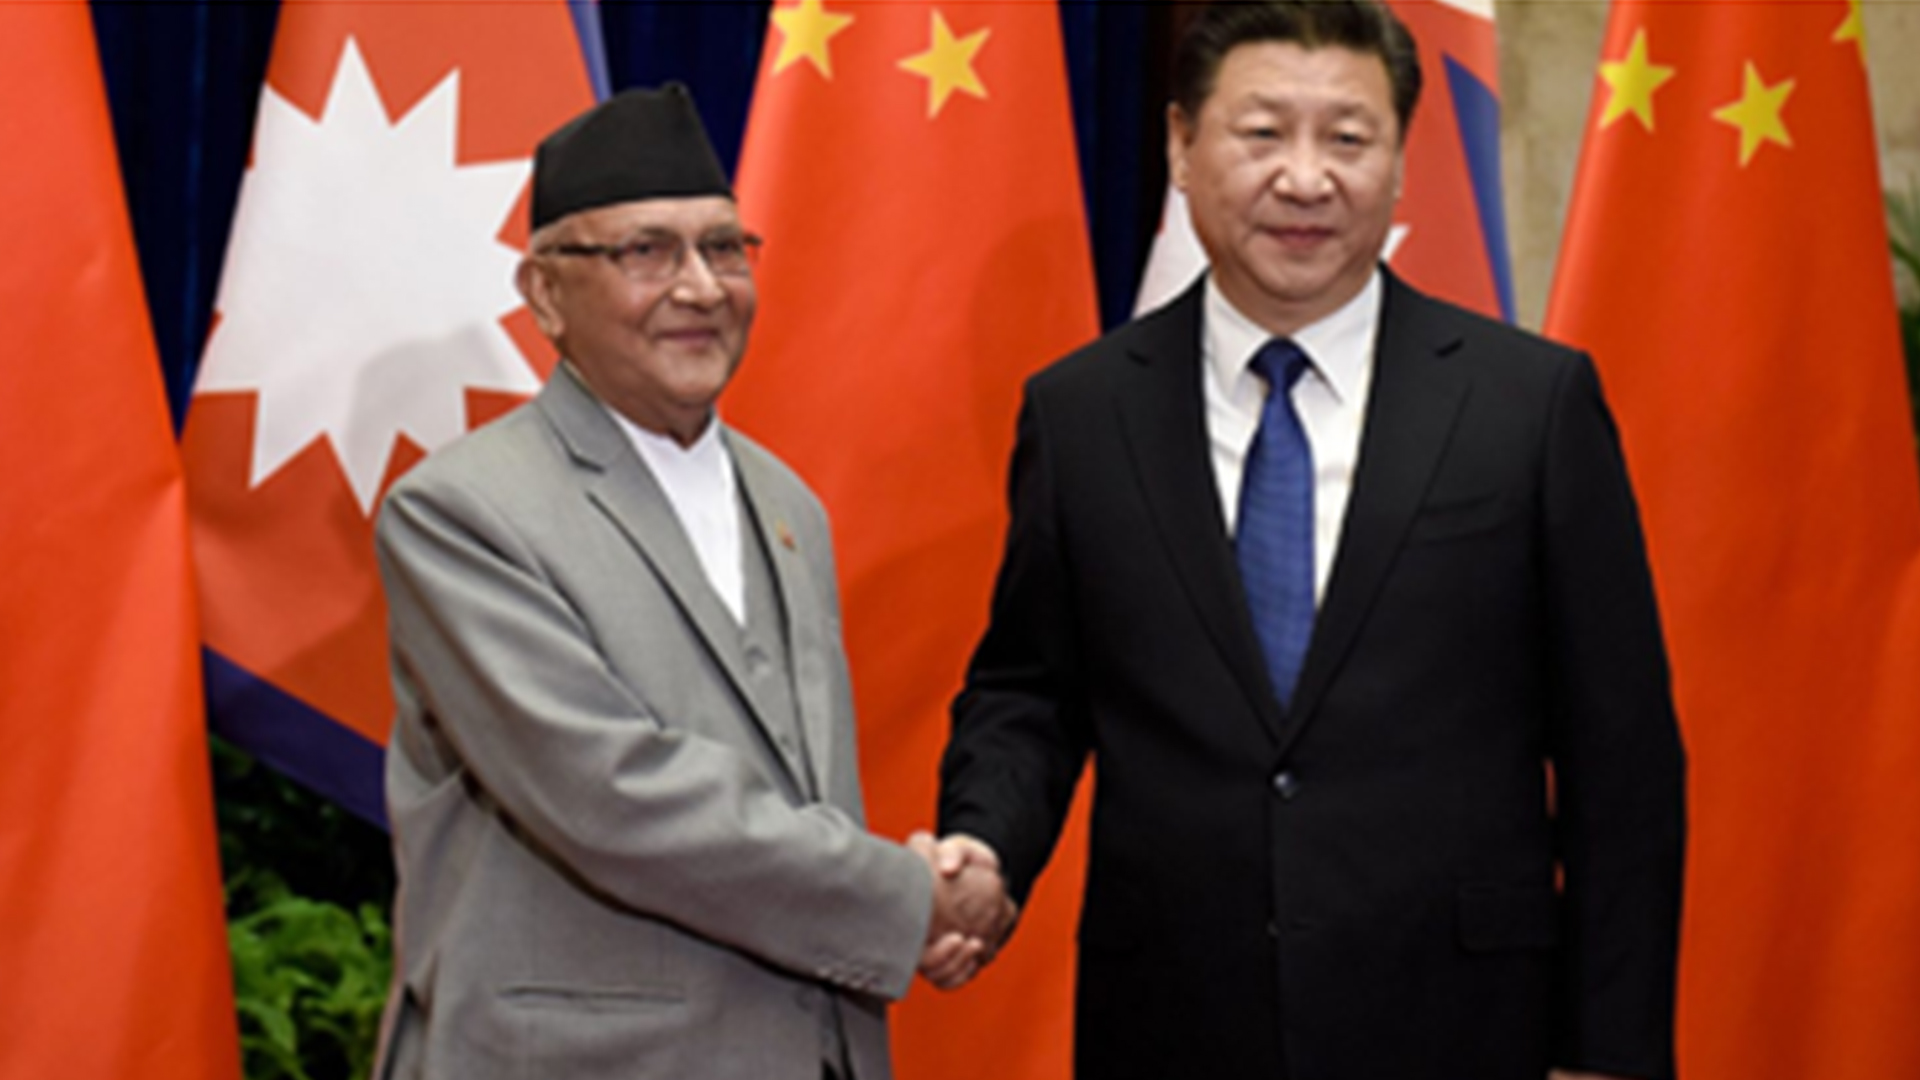 Want to Further Strengthen Nepal-China Ties